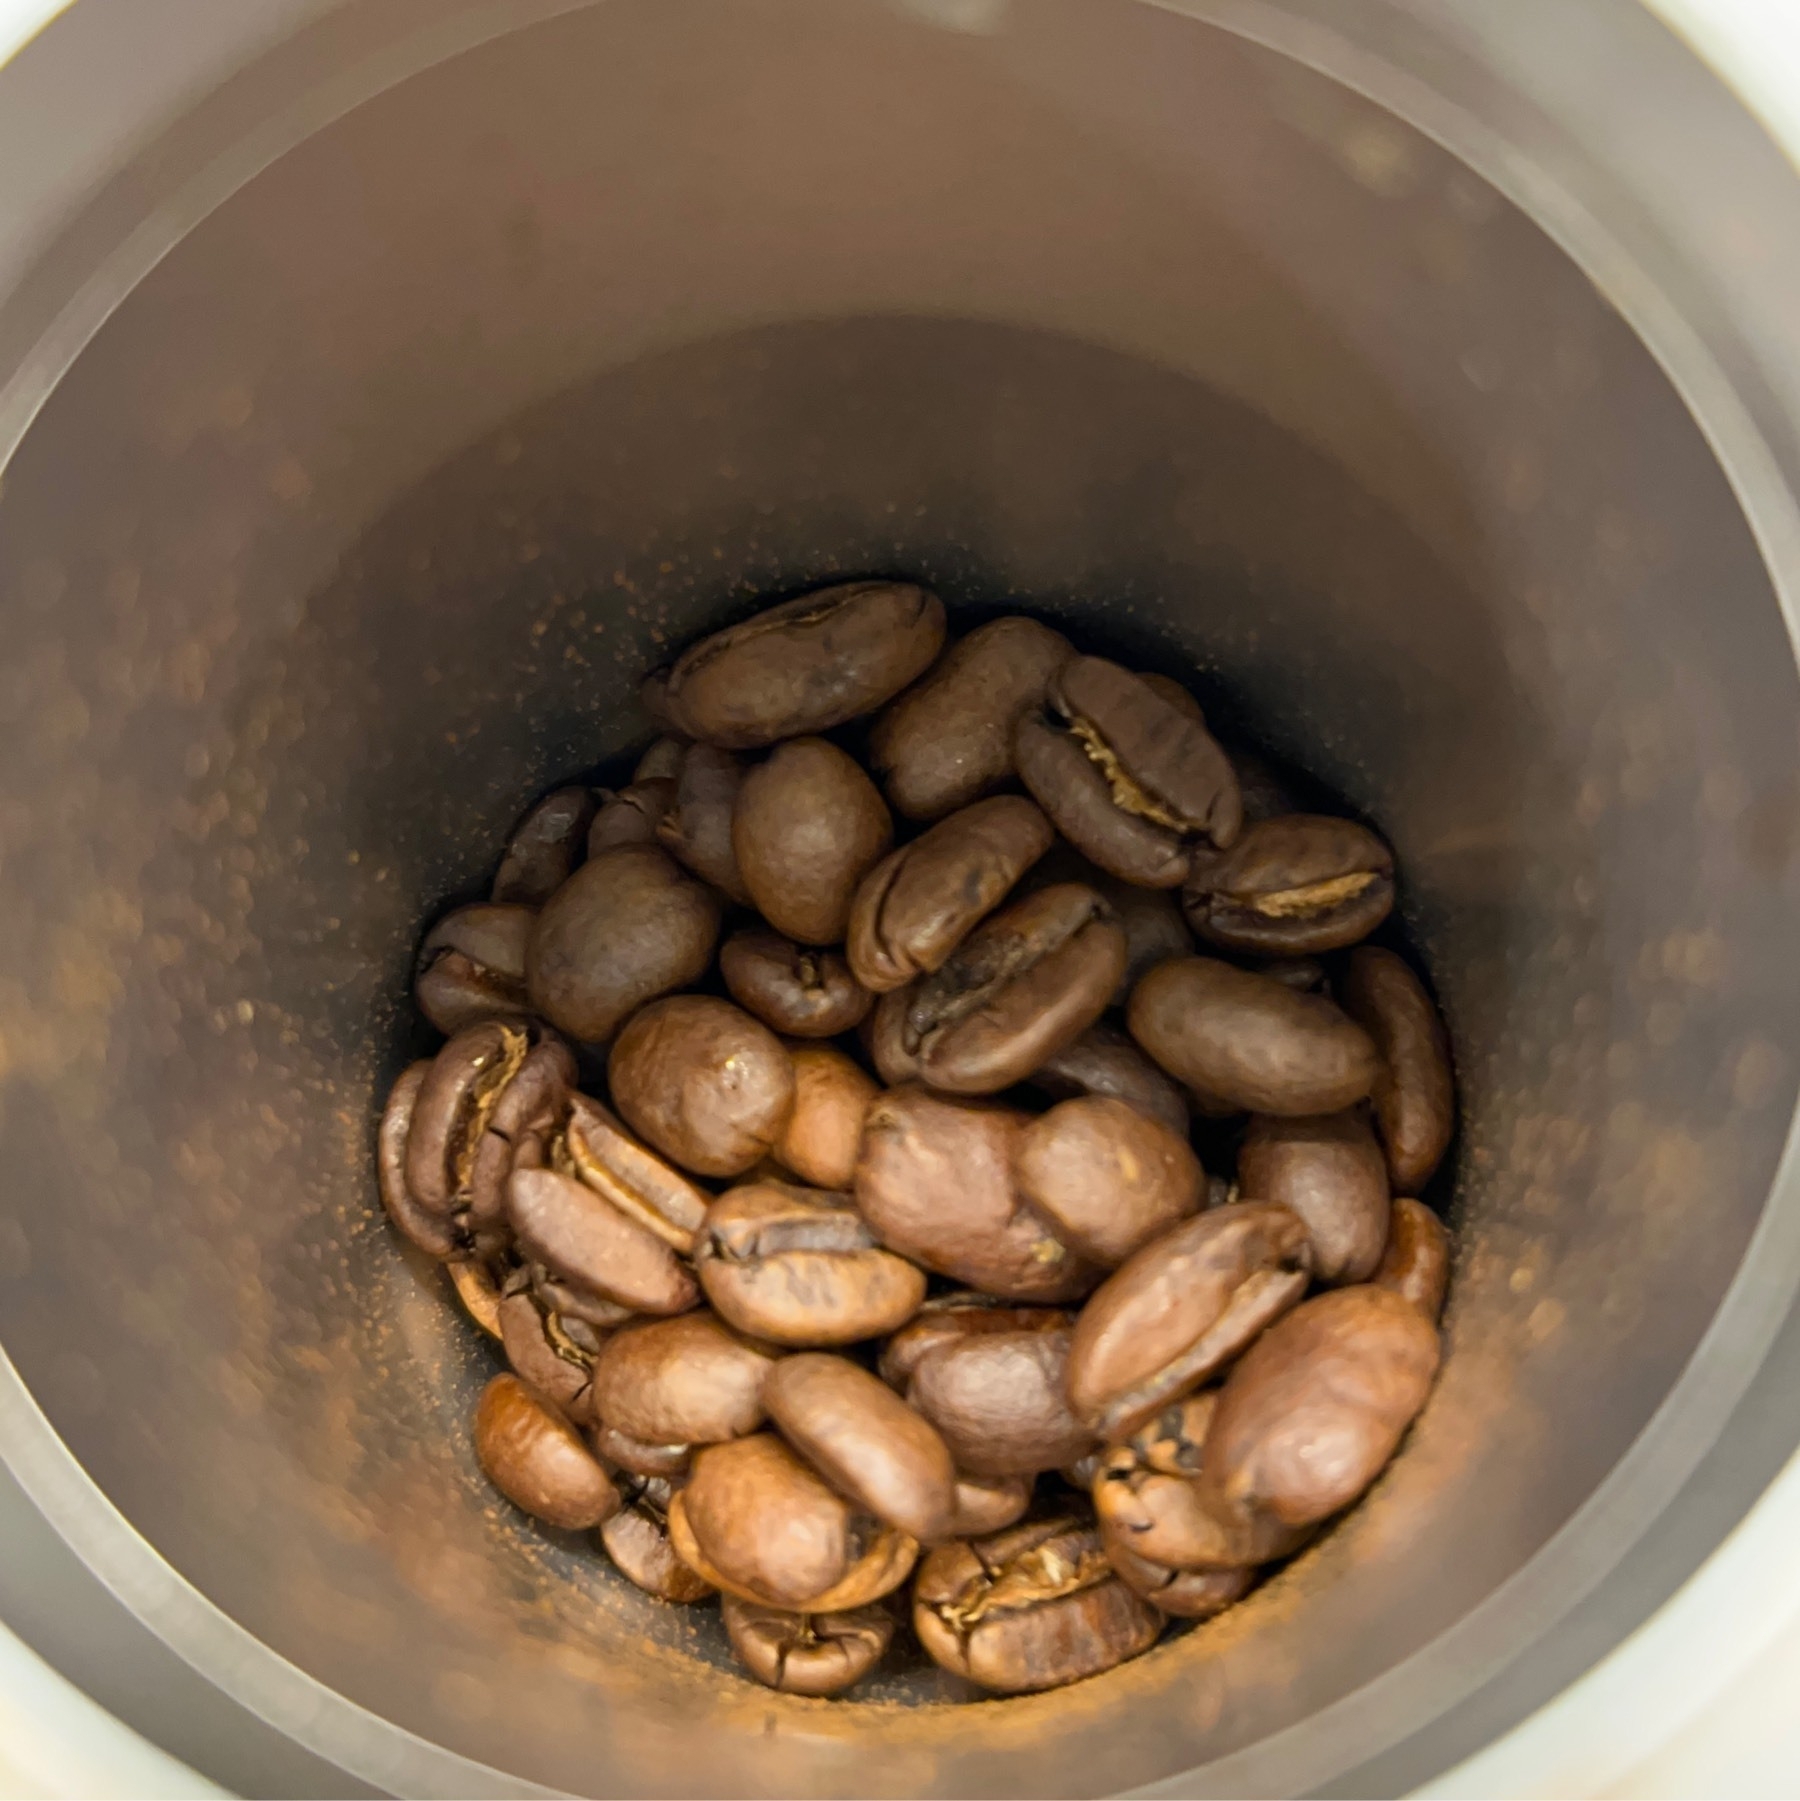 View into an aluminum container with some coffee beans at the bottom.